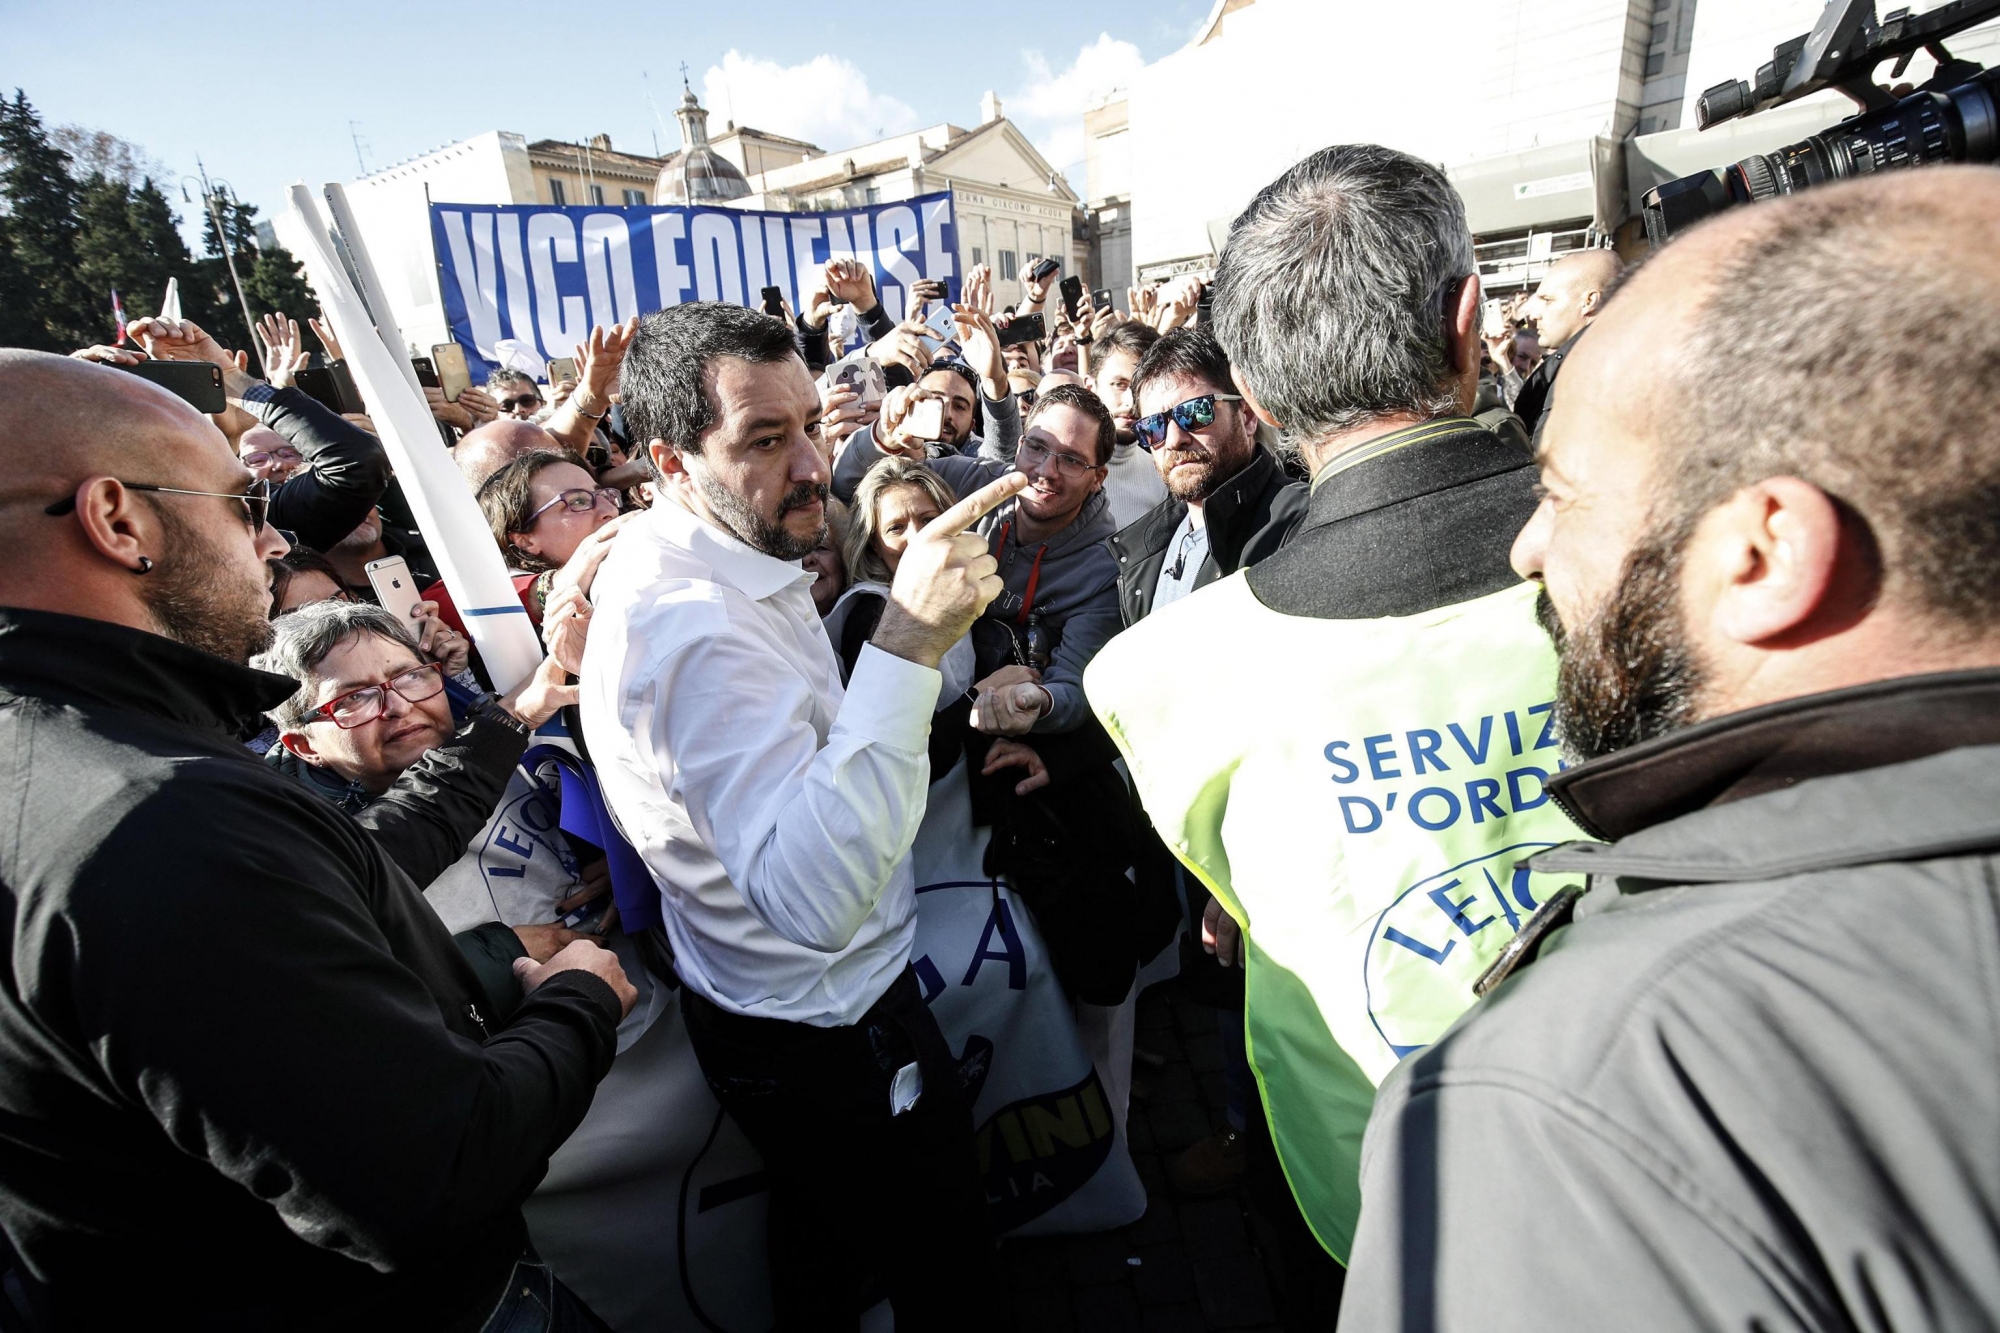 epa07217097 Italian Deputy Premier and Interior Minister Matteo Salvini greets his supporters as he attends a rally staged by the League party in piazza del Popolo, central Rome, Italy, 08 December 2018.  EPA/GIUSEPPE LAMI ITALY POLITICS